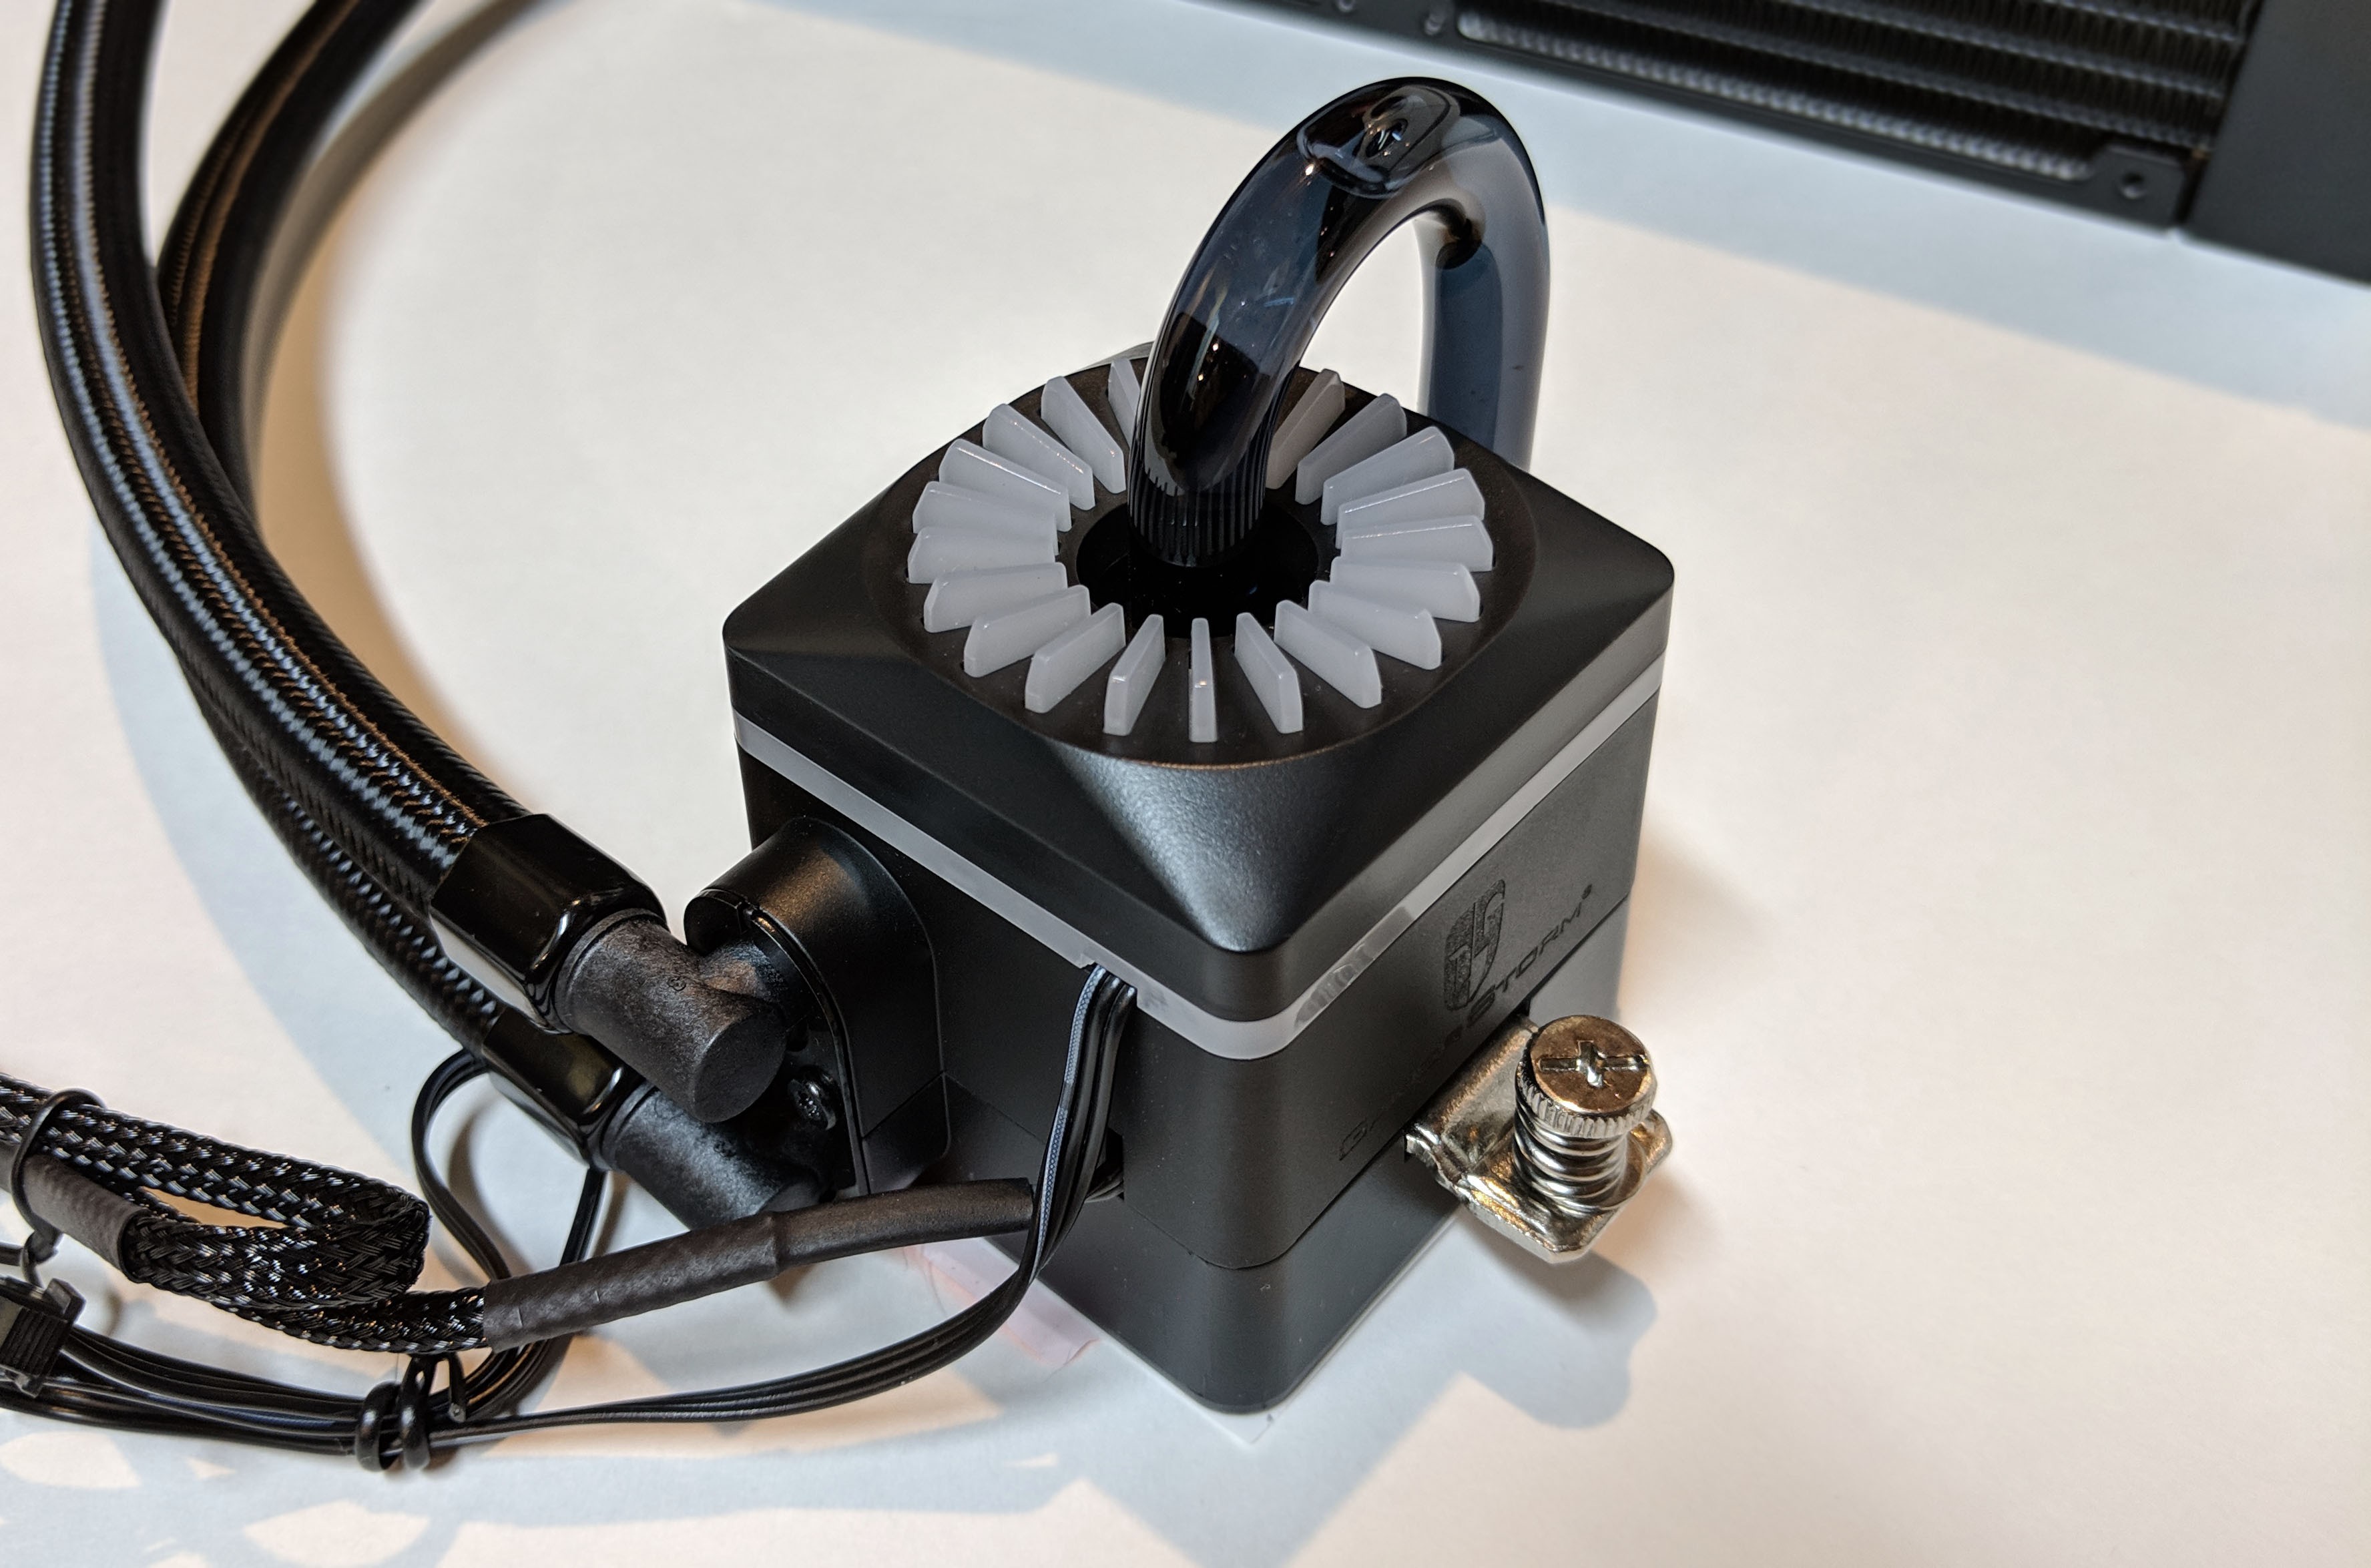 DeepCool Gamer Storm Captain 240 water cooling kiit Reviews, Pros and Cons